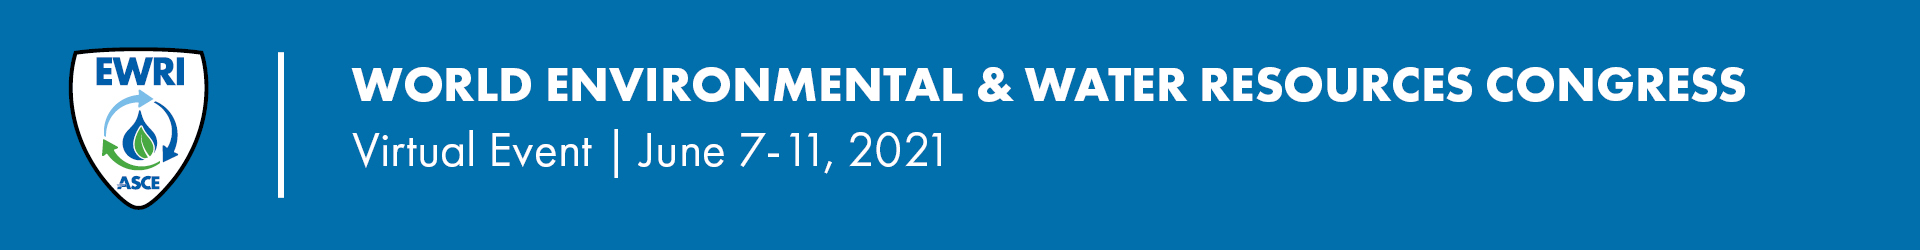 The banner to welcome you to Environmental Water Resource Institute Congress 2021